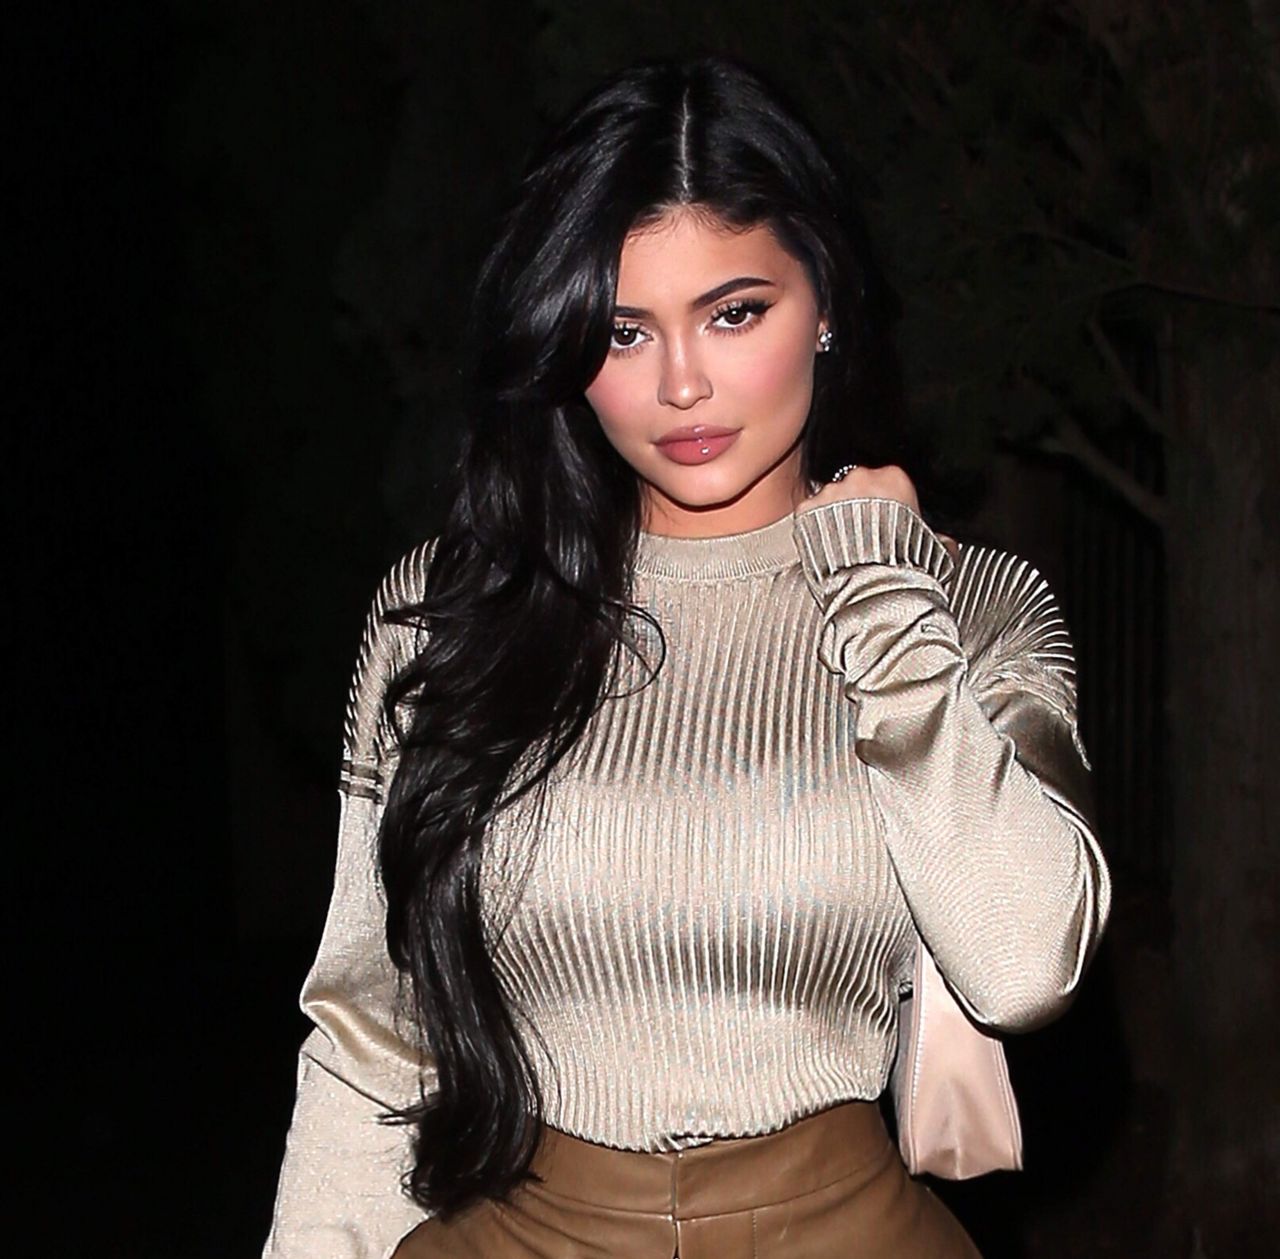 Kylie Jenner Night Out Style, December 20191280 x 1259